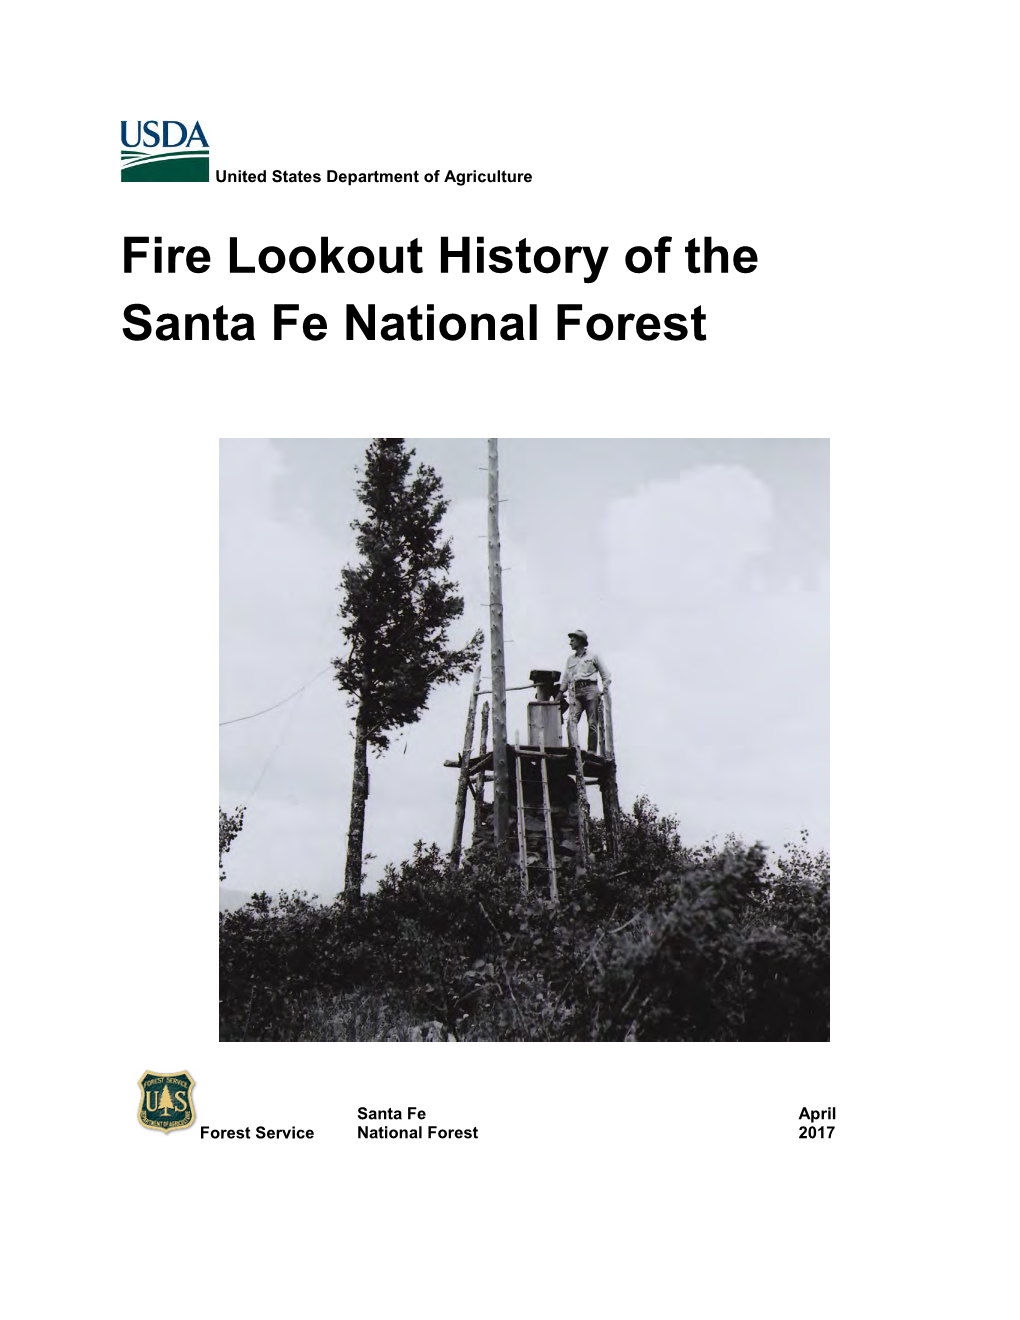 Fire Lookout History of the Santa Fe National Forest